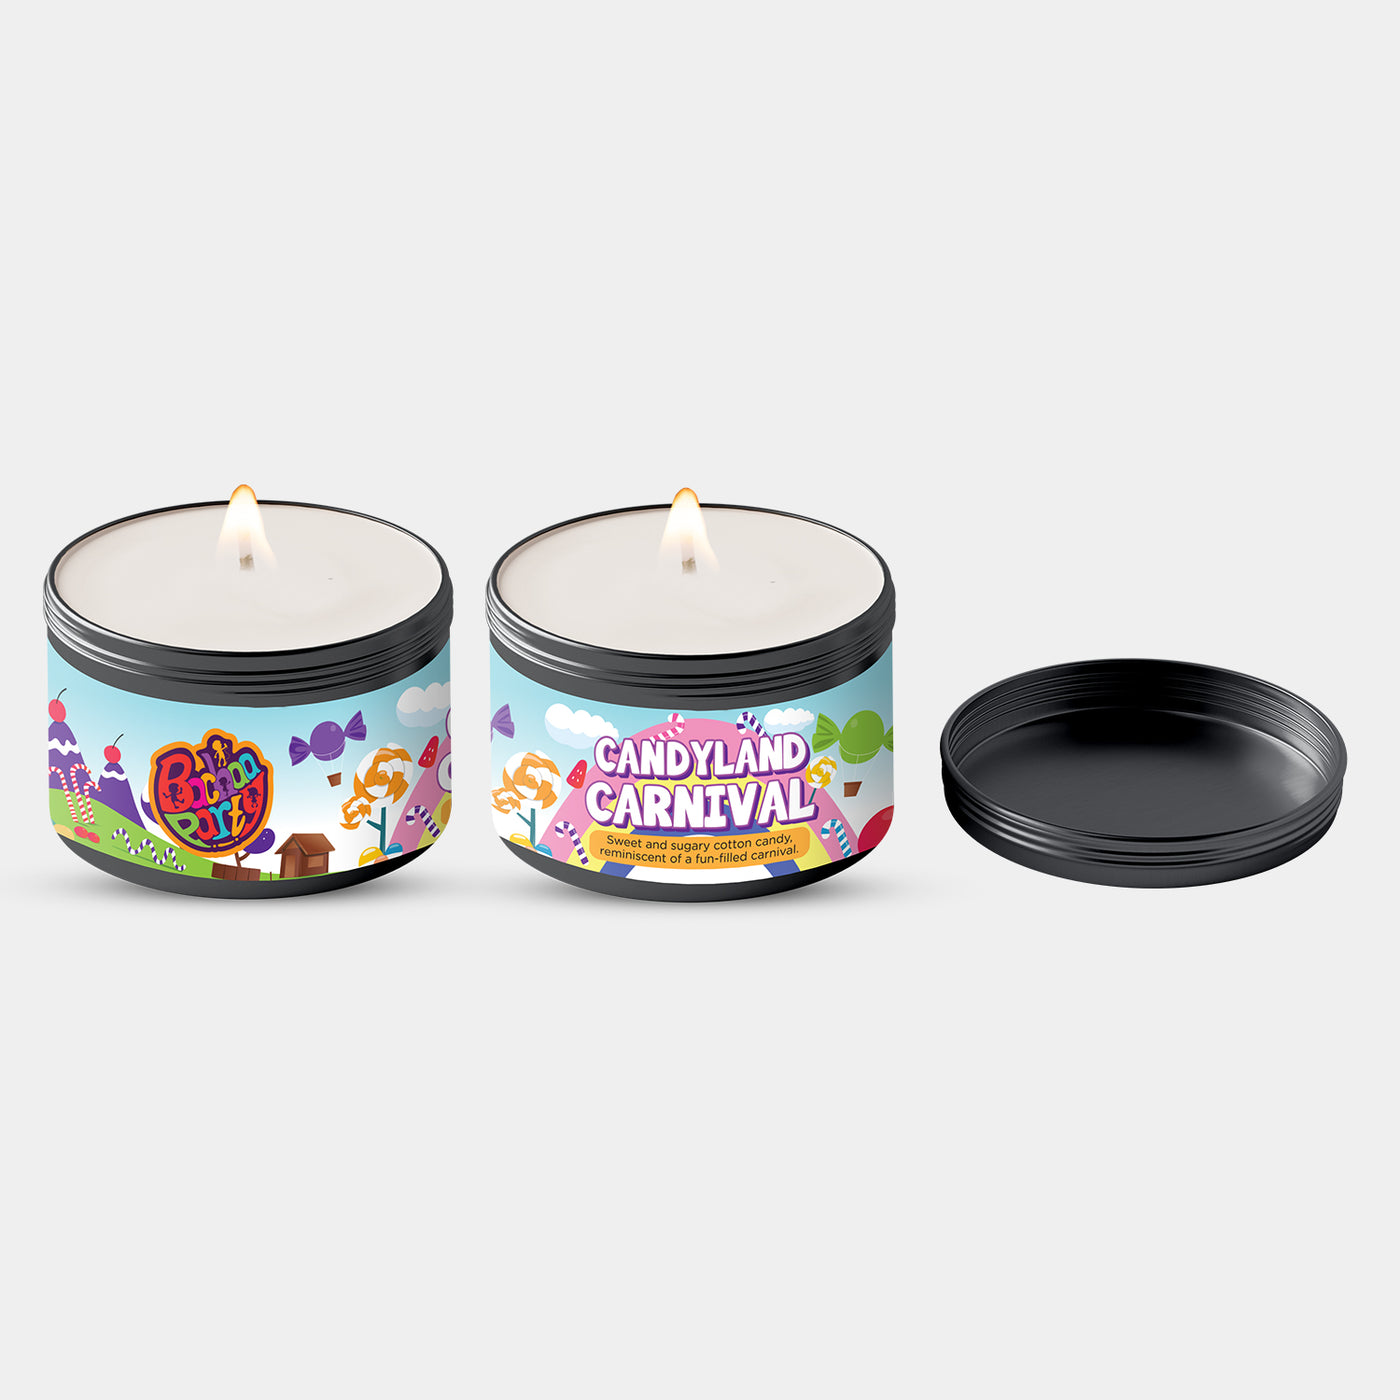 1PC Candyland Carnival Scented Candle in Mini Jar